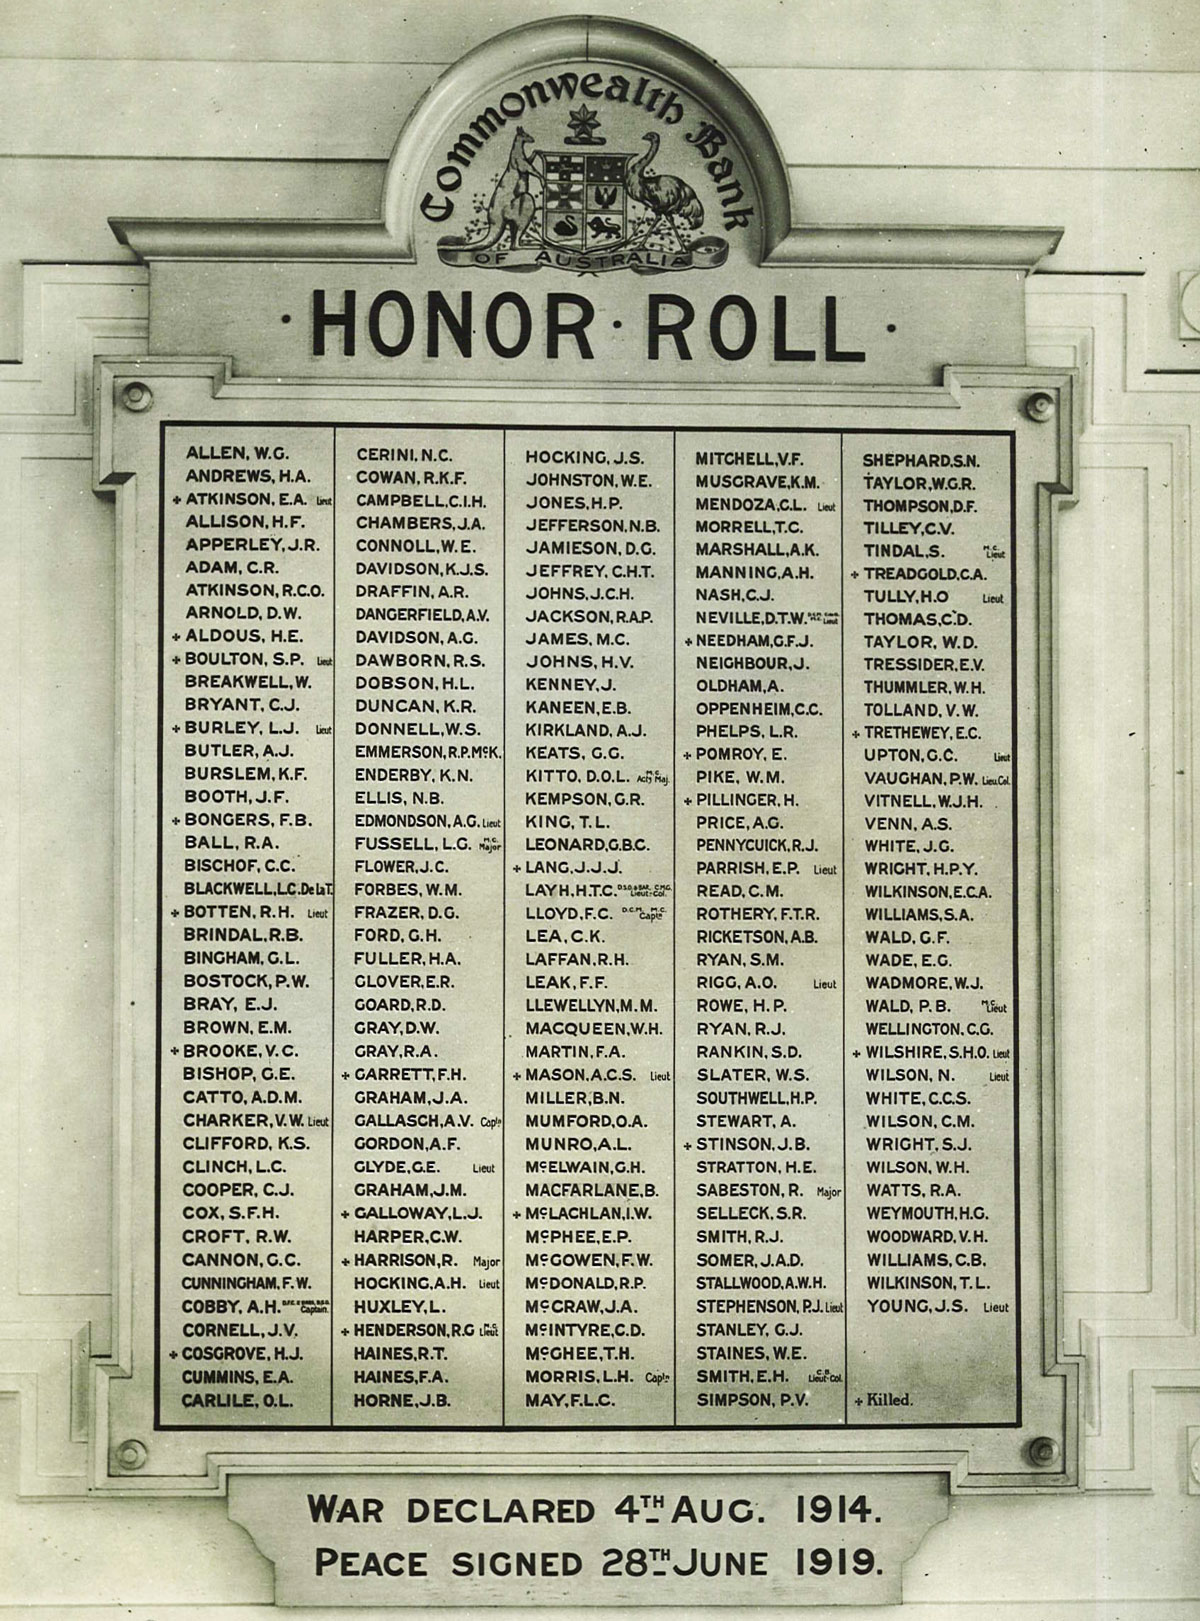 The Bank’s Honor Roll, which features the names of all staff who enlisted in the First World War